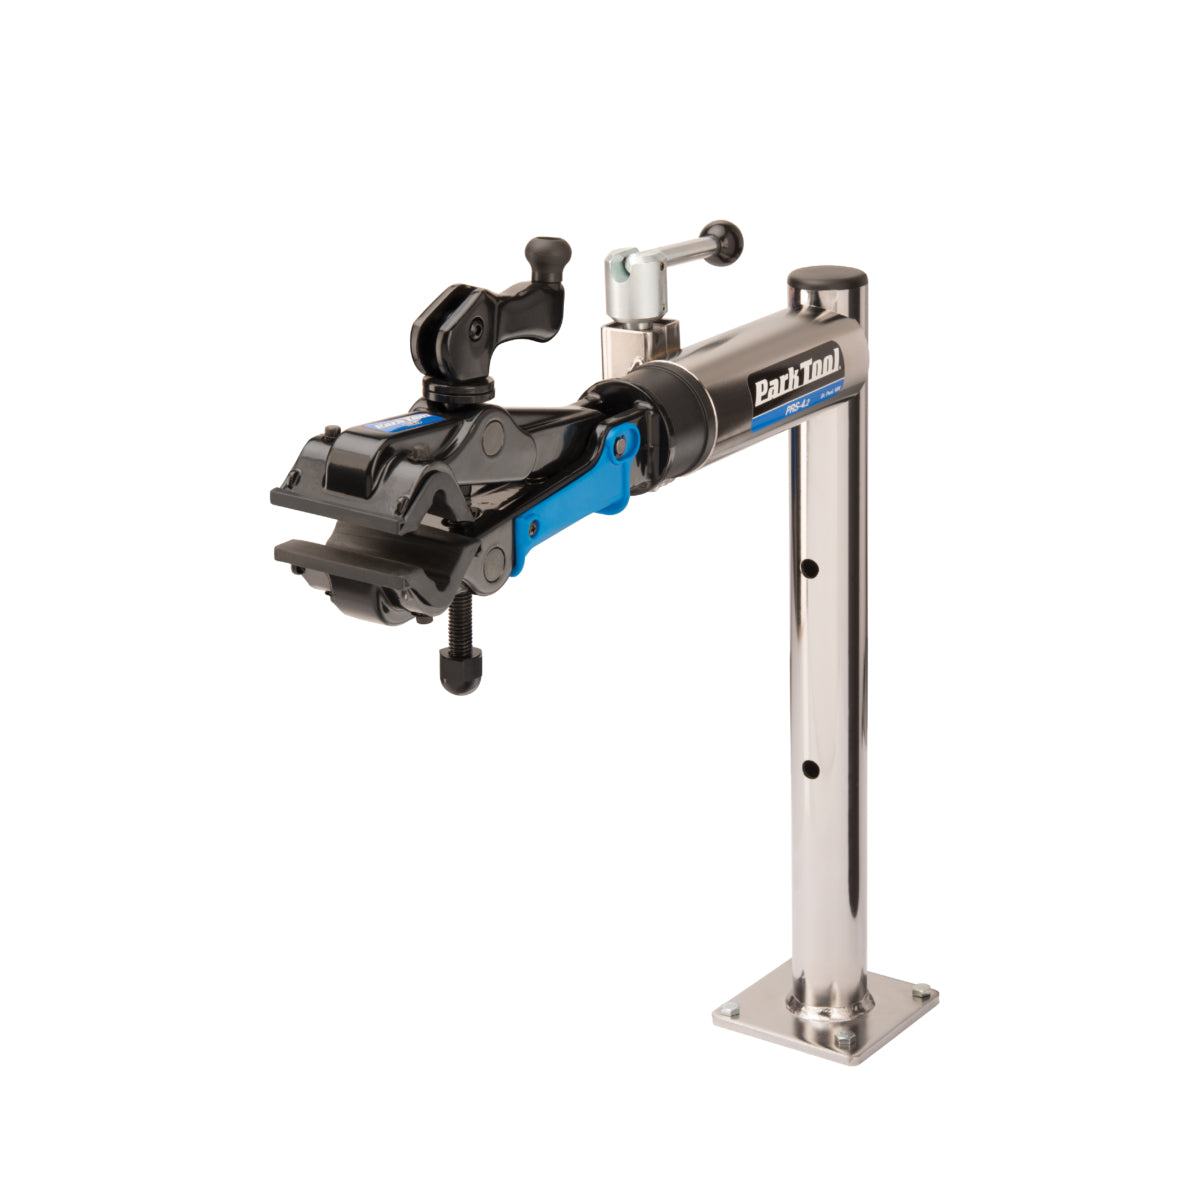 Park Tool PRS-4.2-2 Deluxe Bench Mount Repair Stand With Micro-Adjust Clamp